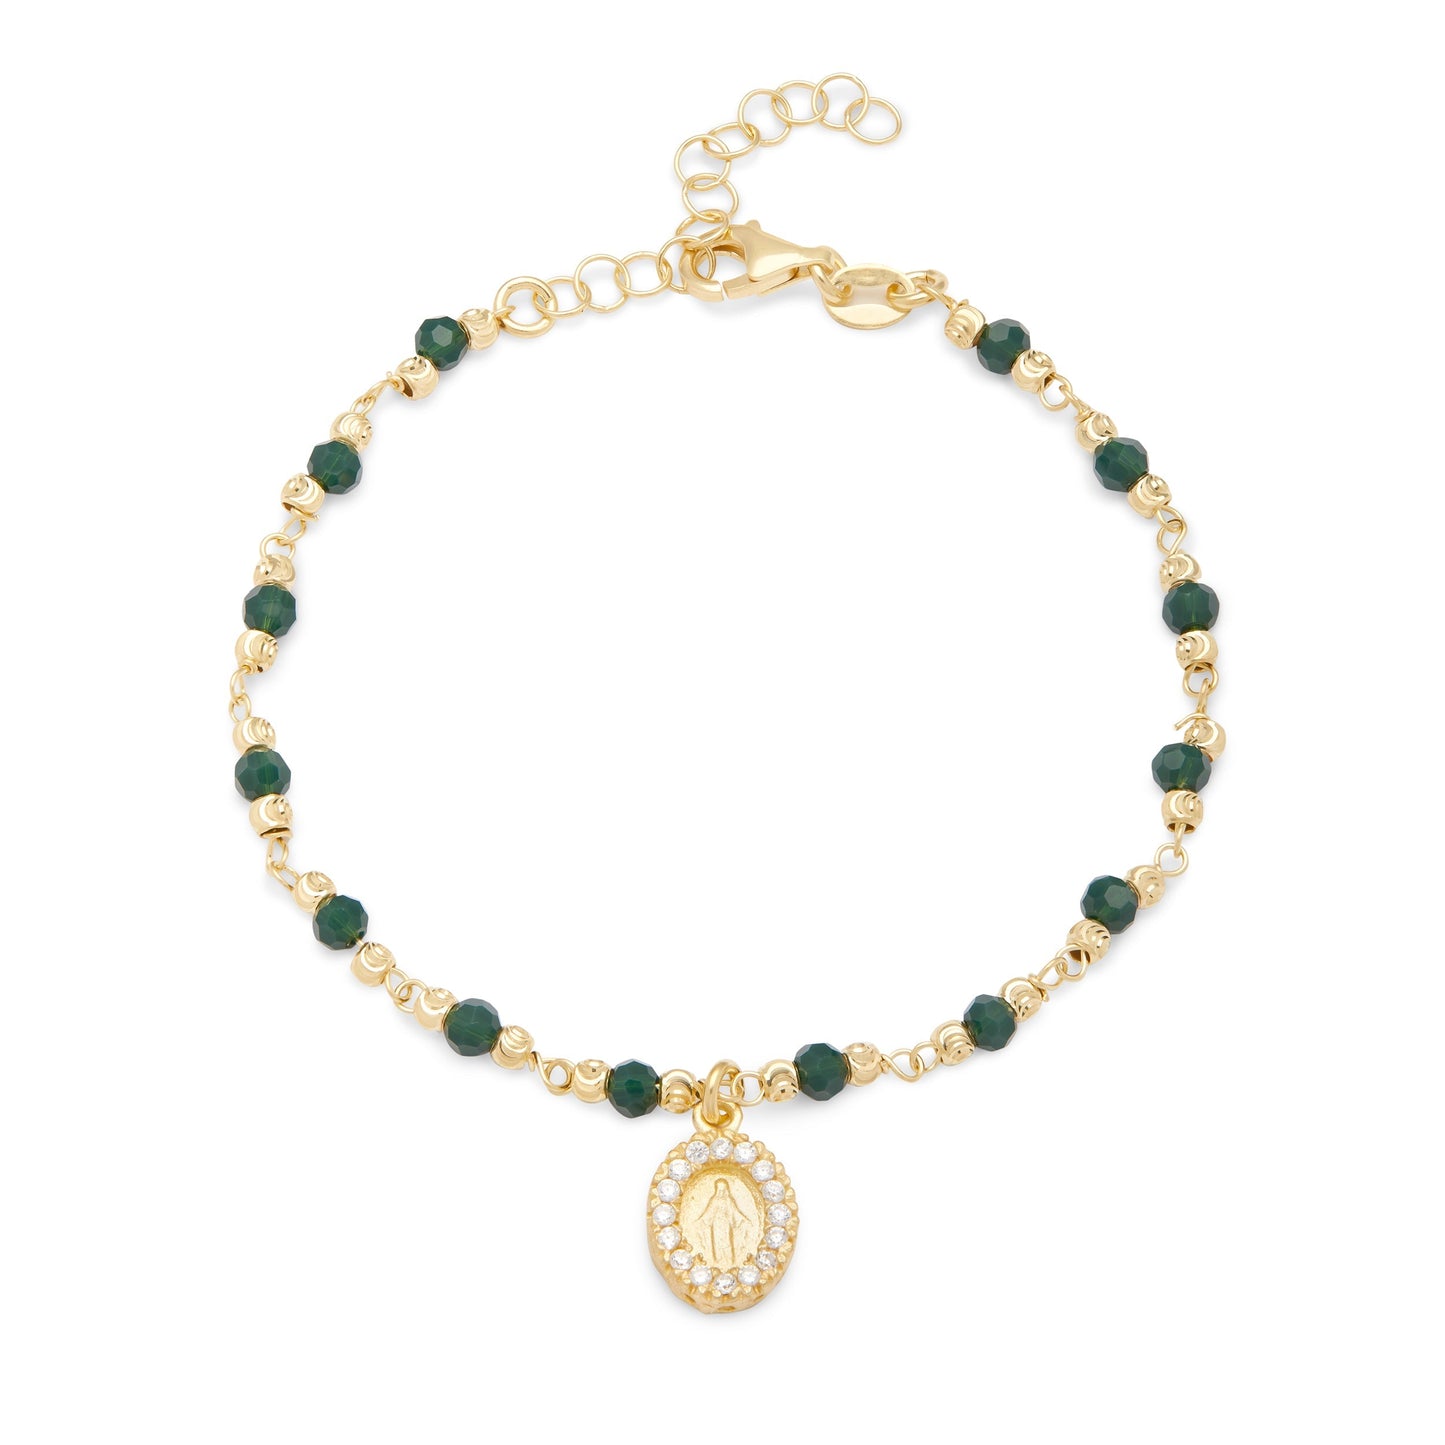 Mondo Cattolico Bracelet Adjustable Gold-plated Sterling Silver Bracelet With Green Beads and Miraculous Medal With Cubic Zirconia Pendant